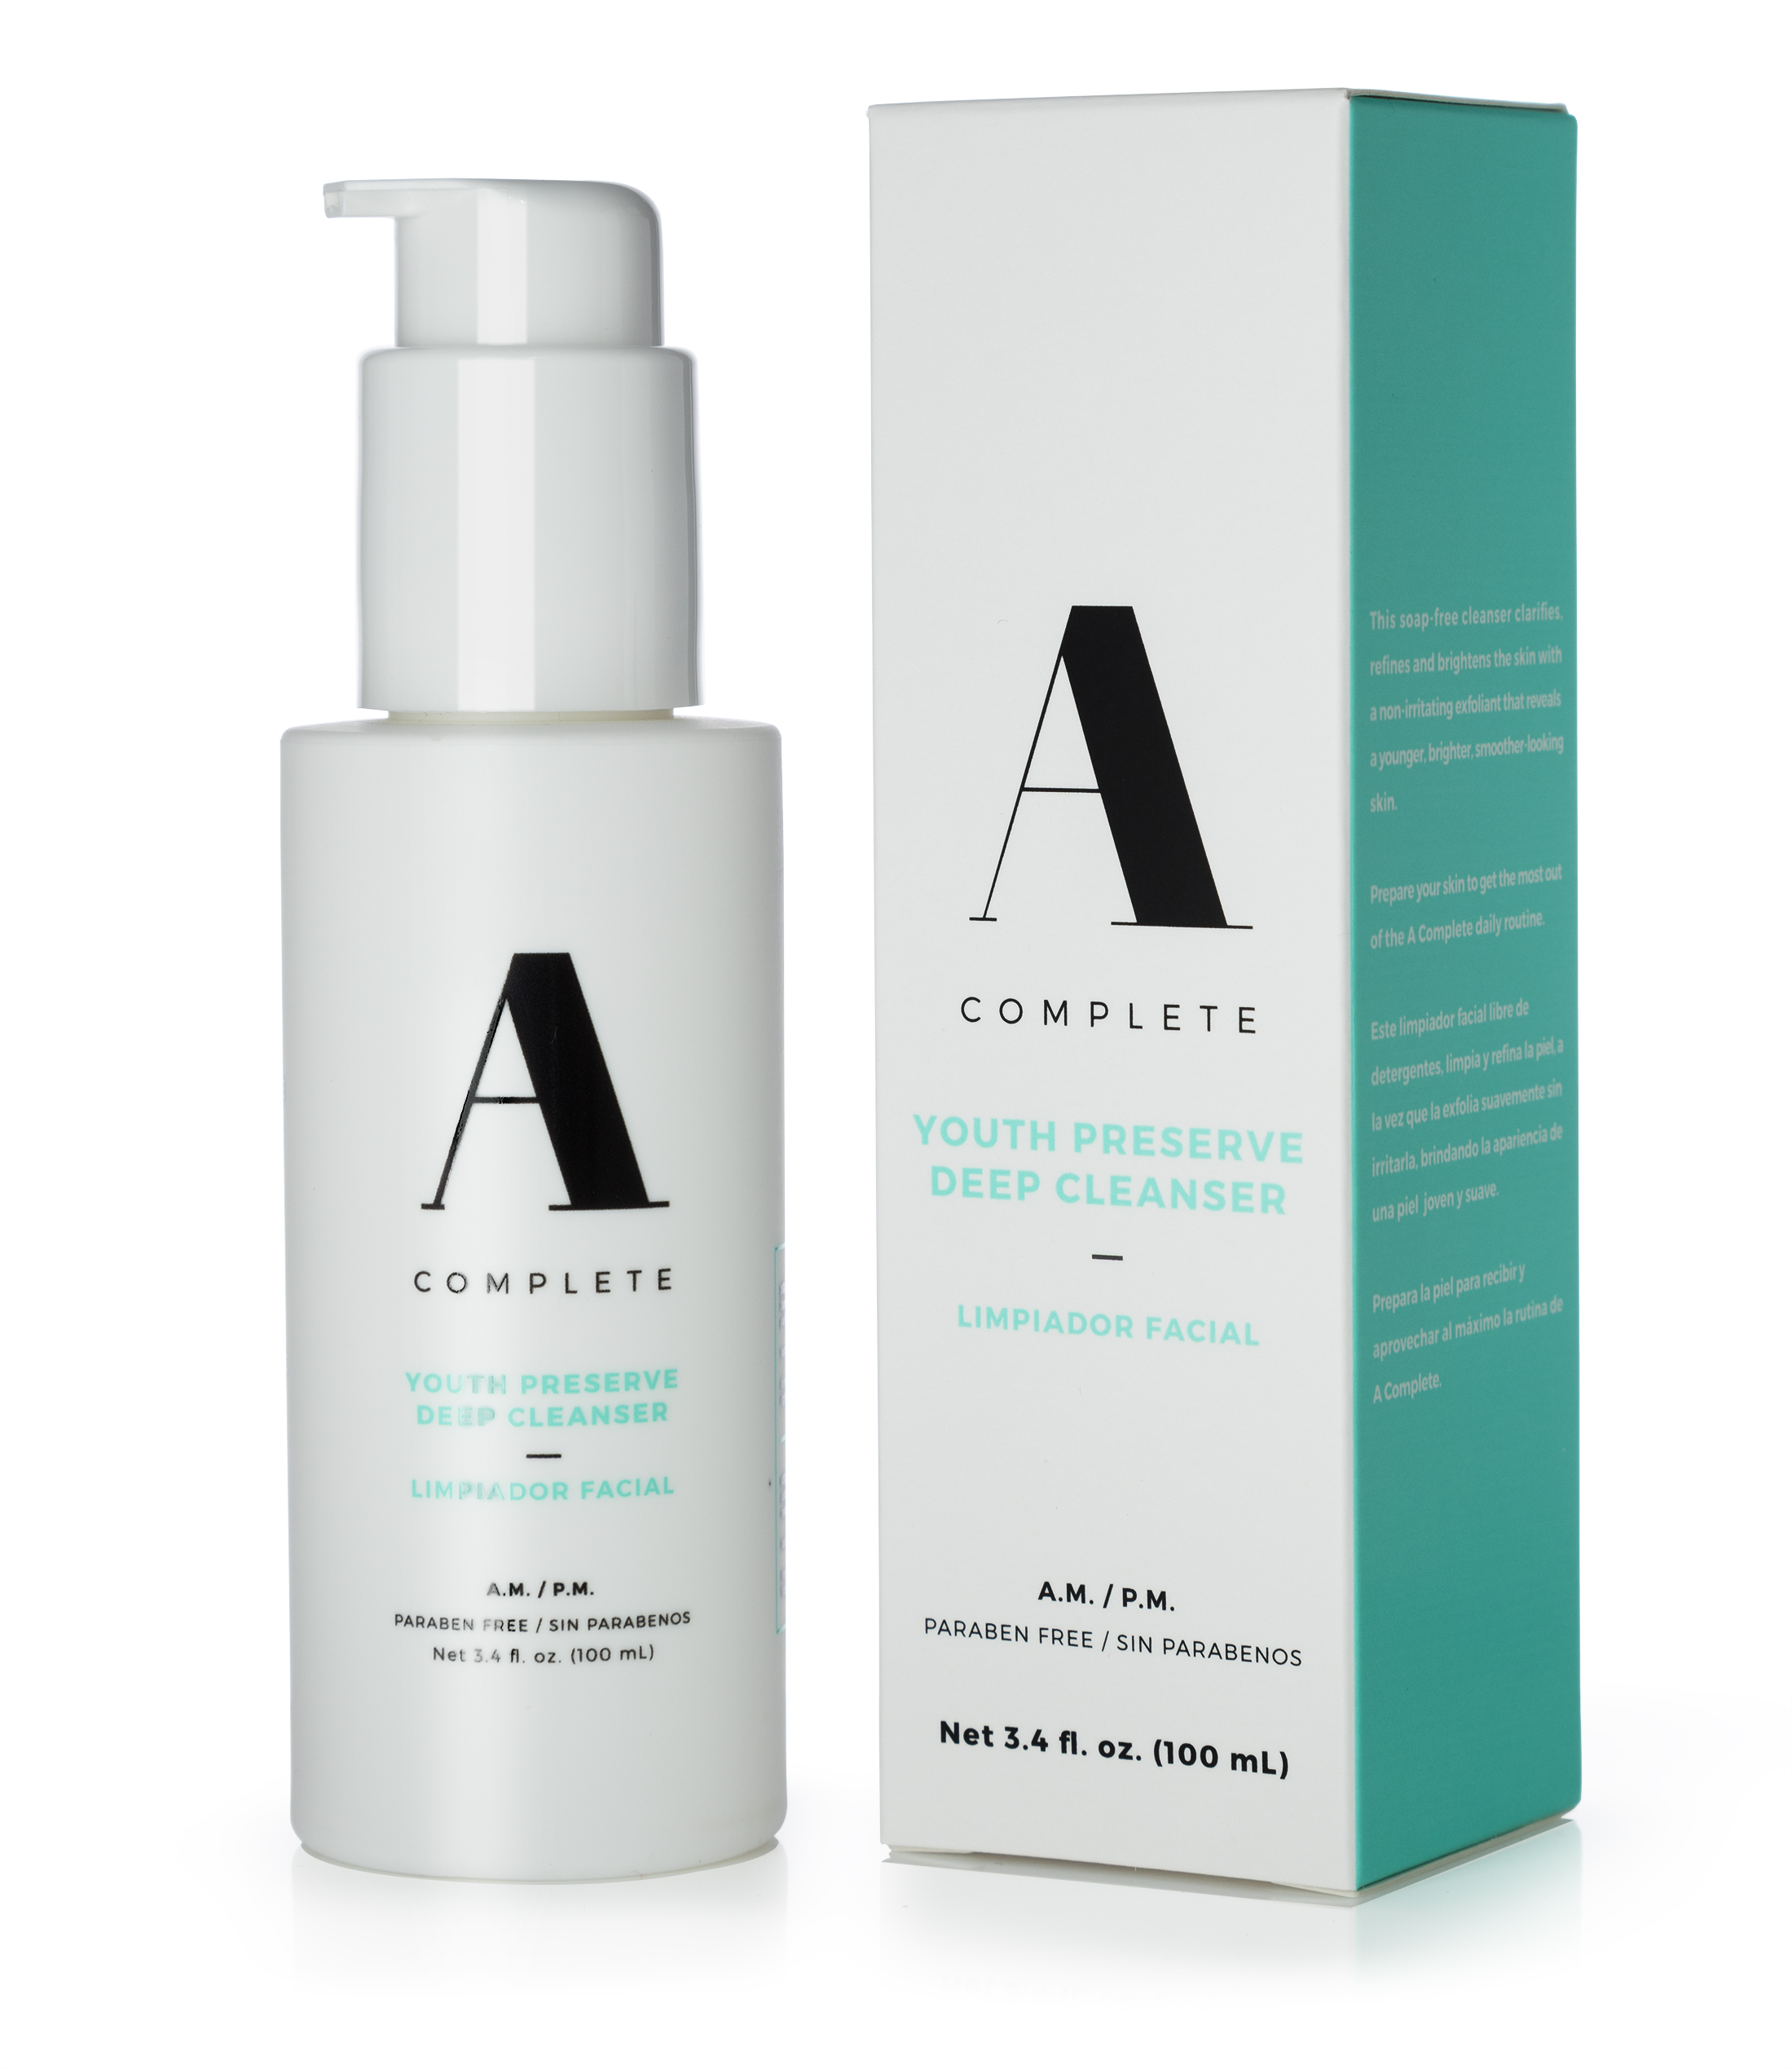 A Complete Youth Preserve Deep Cleanser